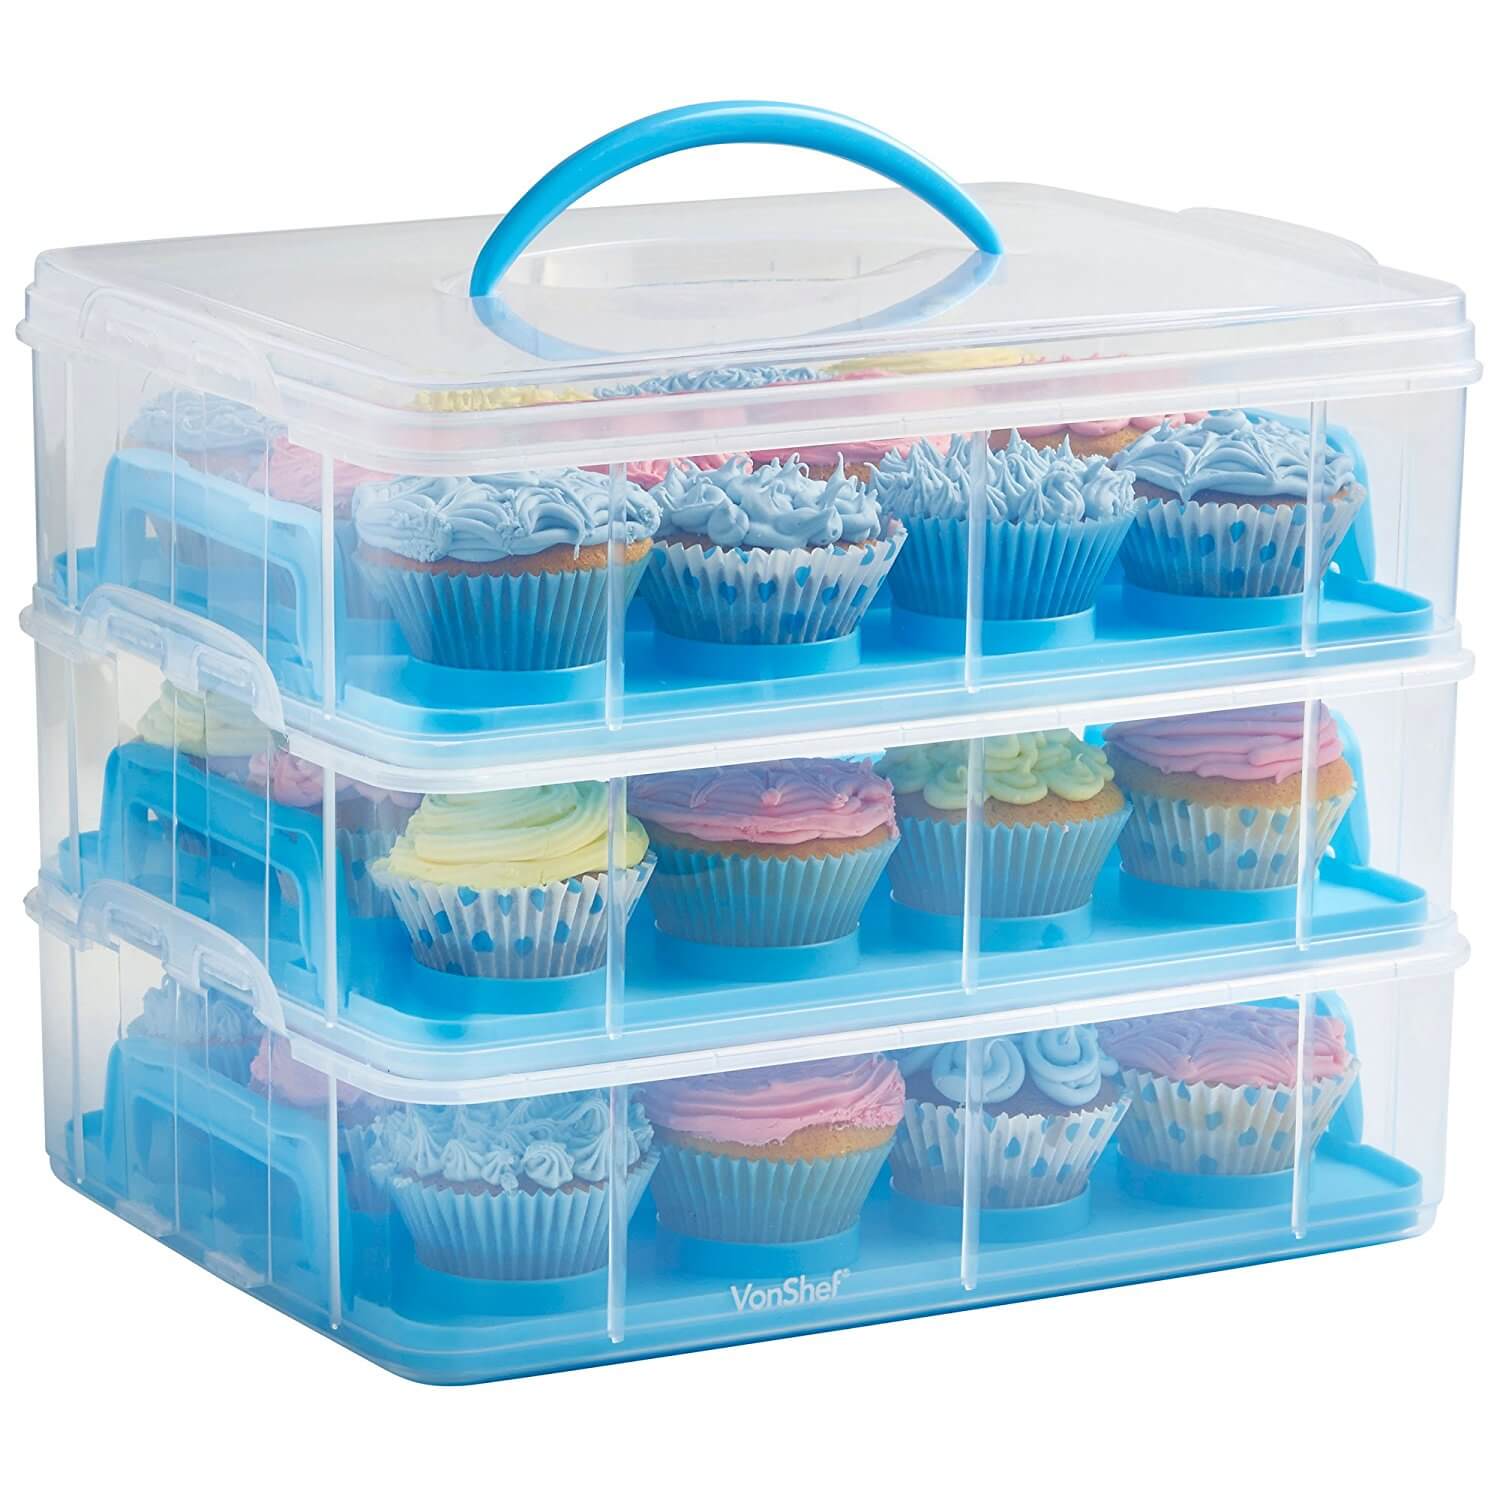 VonShef Snap and Stack Blue 3 Tier Cupcake Holder and Cake Carrier Container